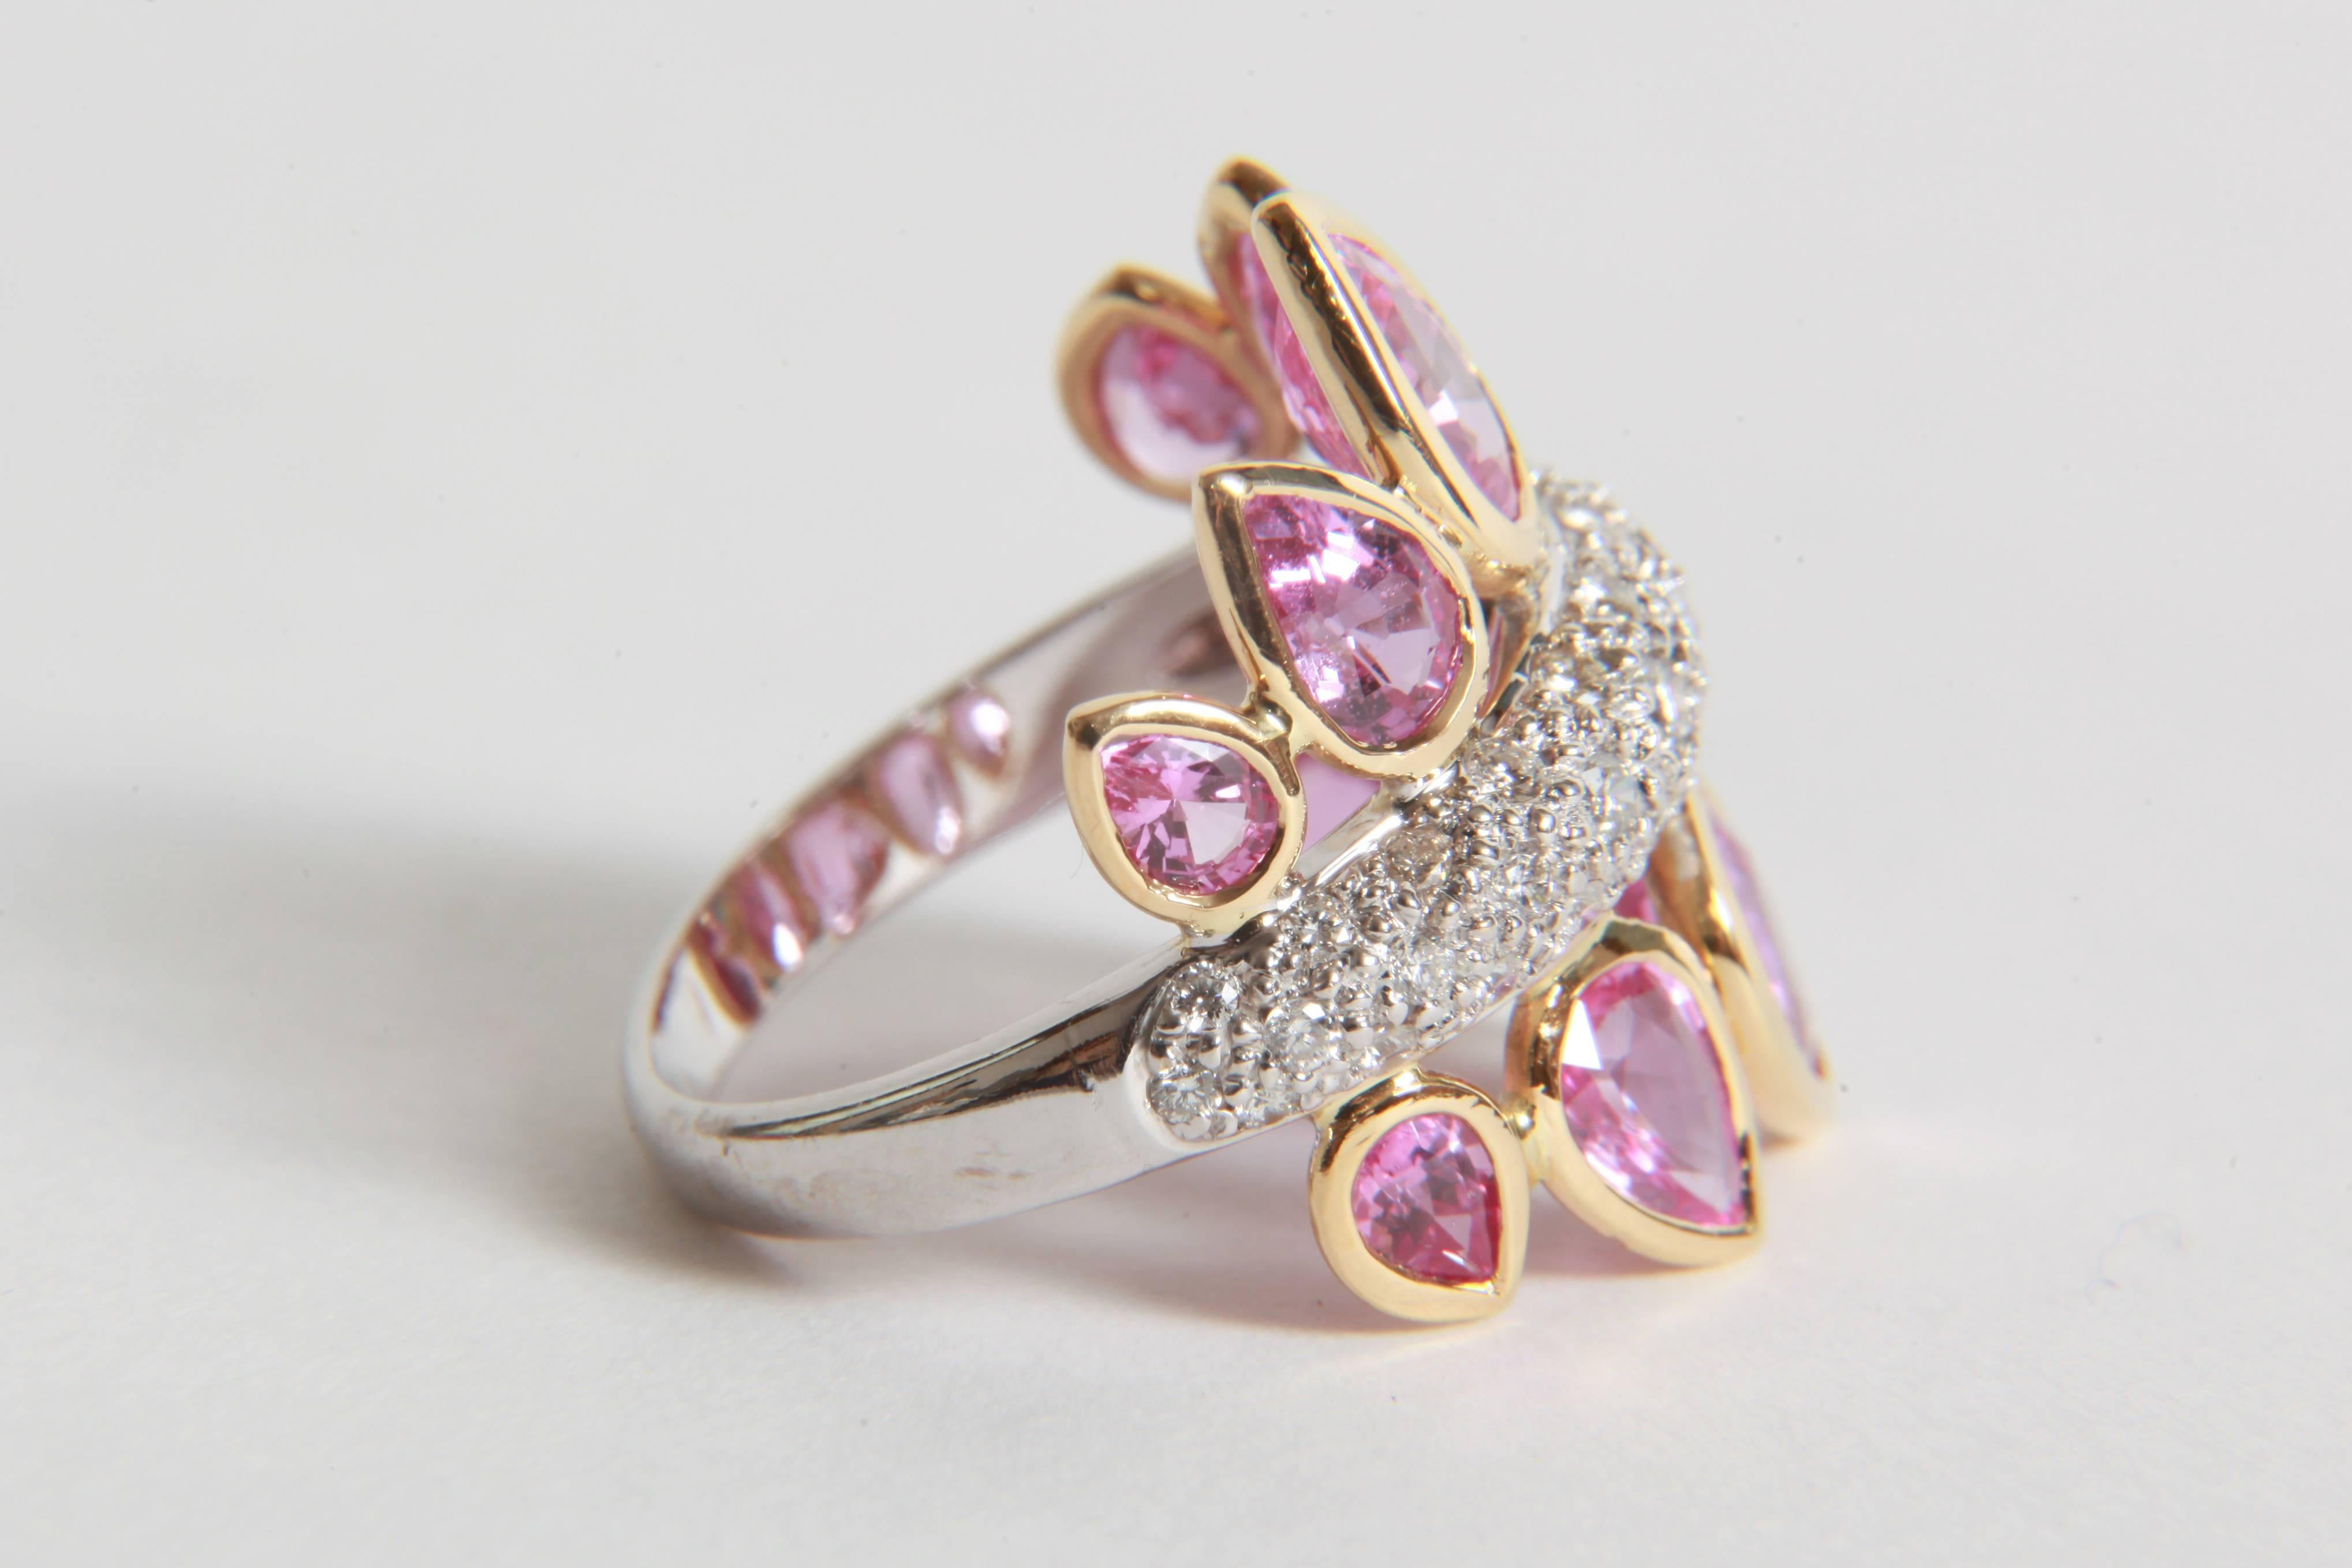 4, 74 Carats Pink Sapphires and 1 Carat White Diamonds Ring by Marion Jeantet 2